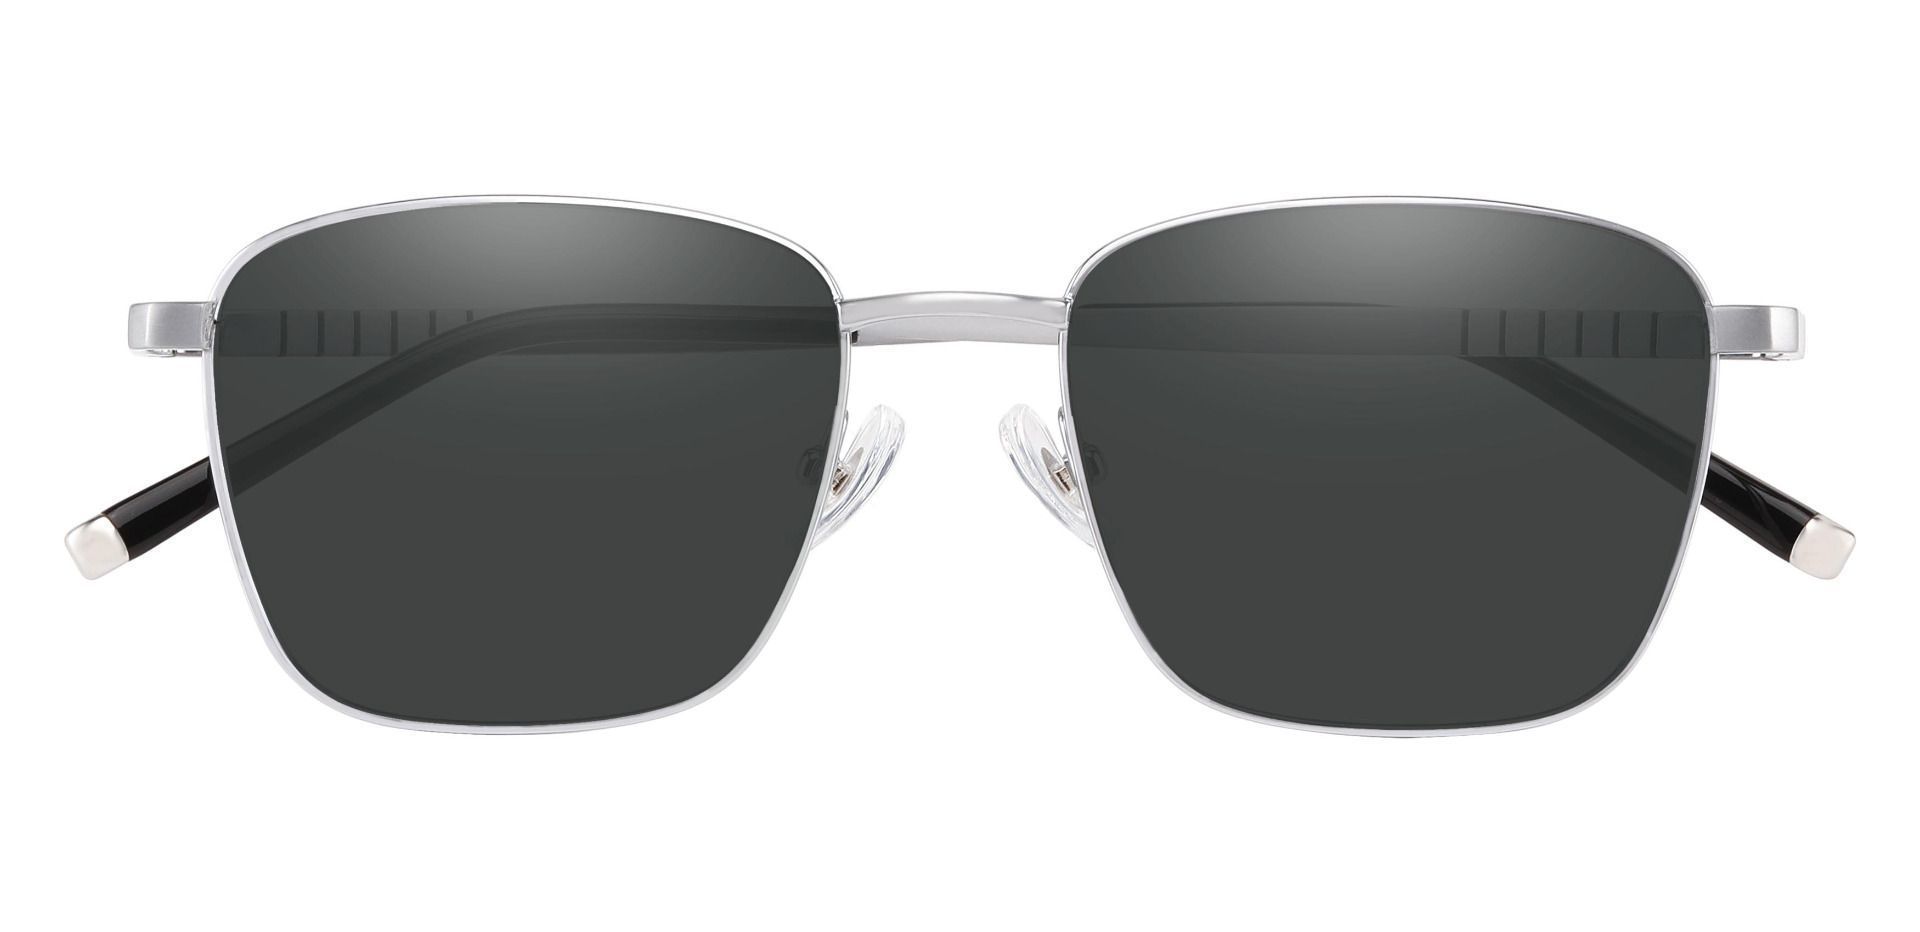 May Square Lined Bifocal Sunglasses - Silver Frame With Gray Lenses